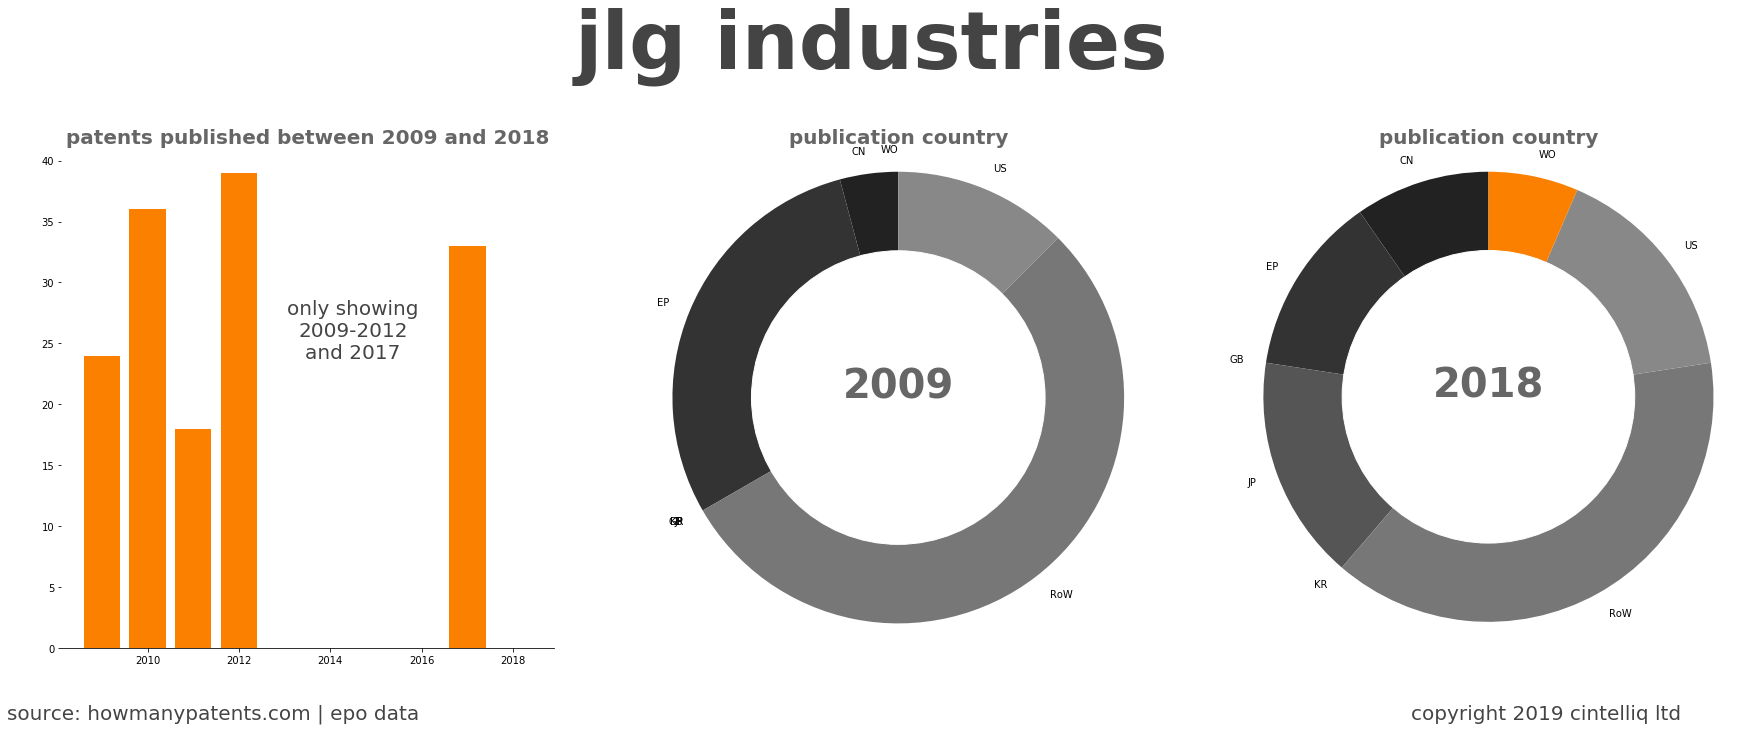 summary of patents for Jlg Industries